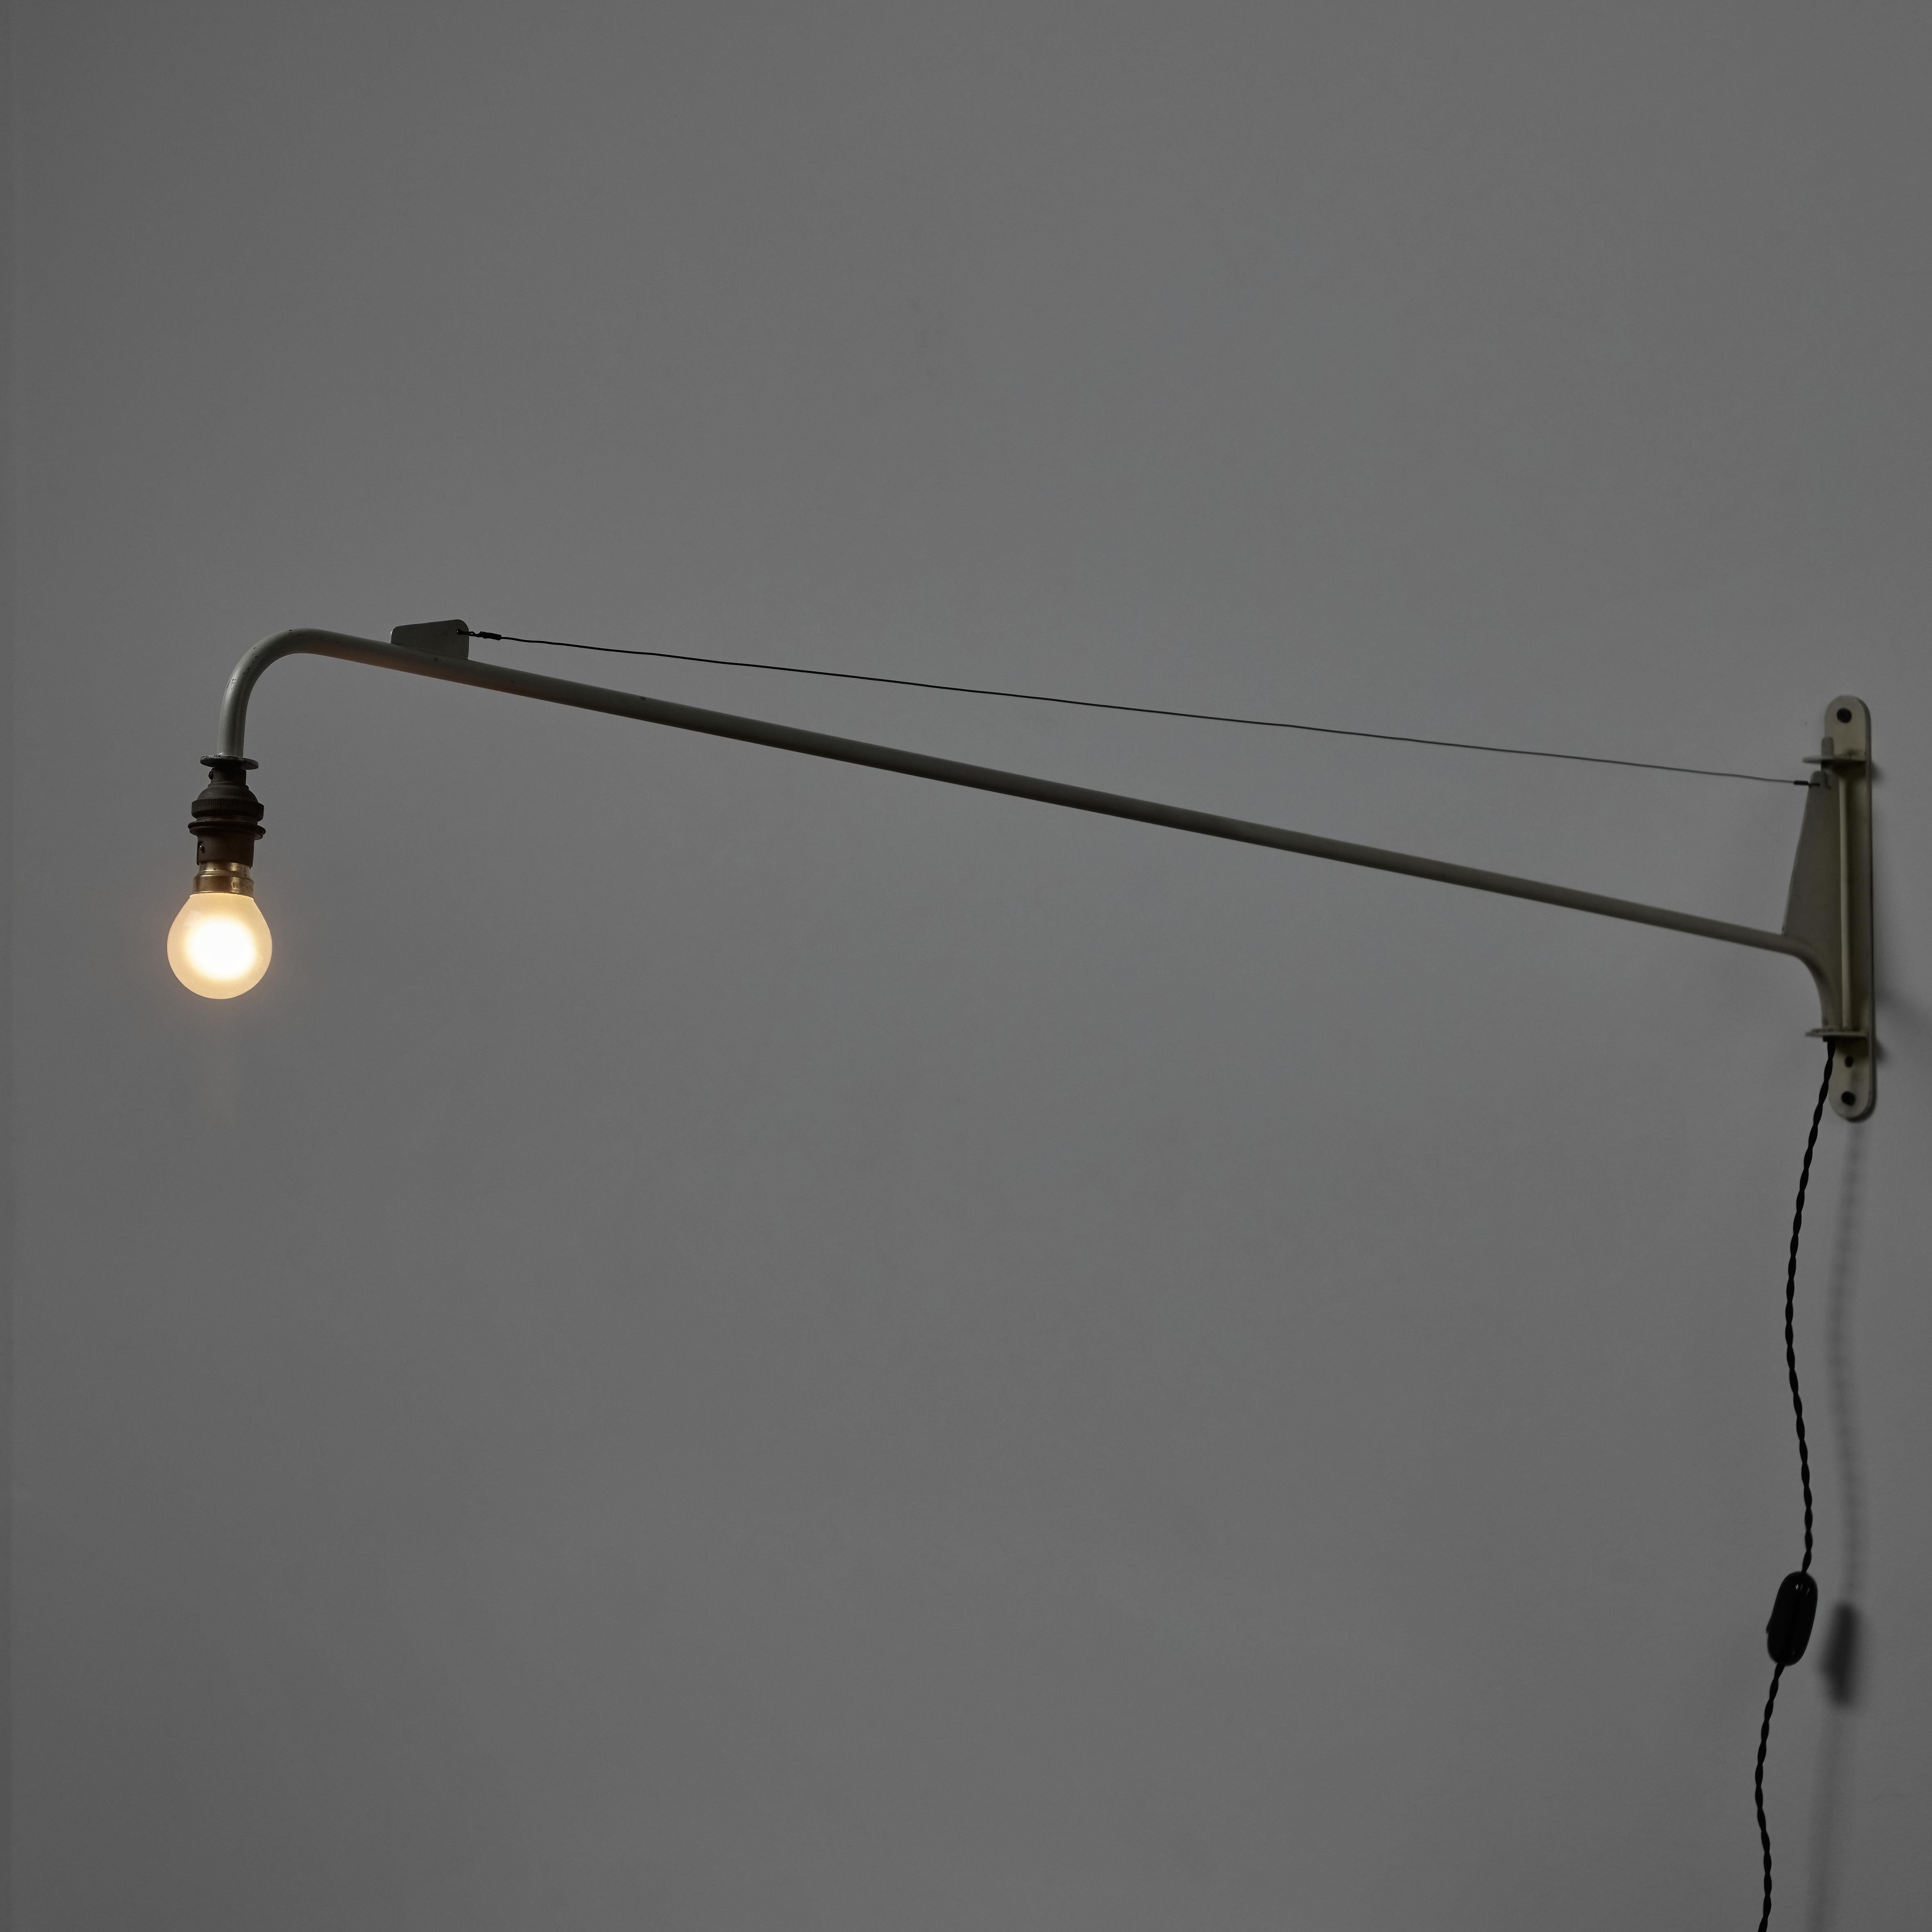 'Potence D'eclairage' Swing Jib Wall Light by Jean Prouve In Fair Condition For Sale In Los Angeles, CA